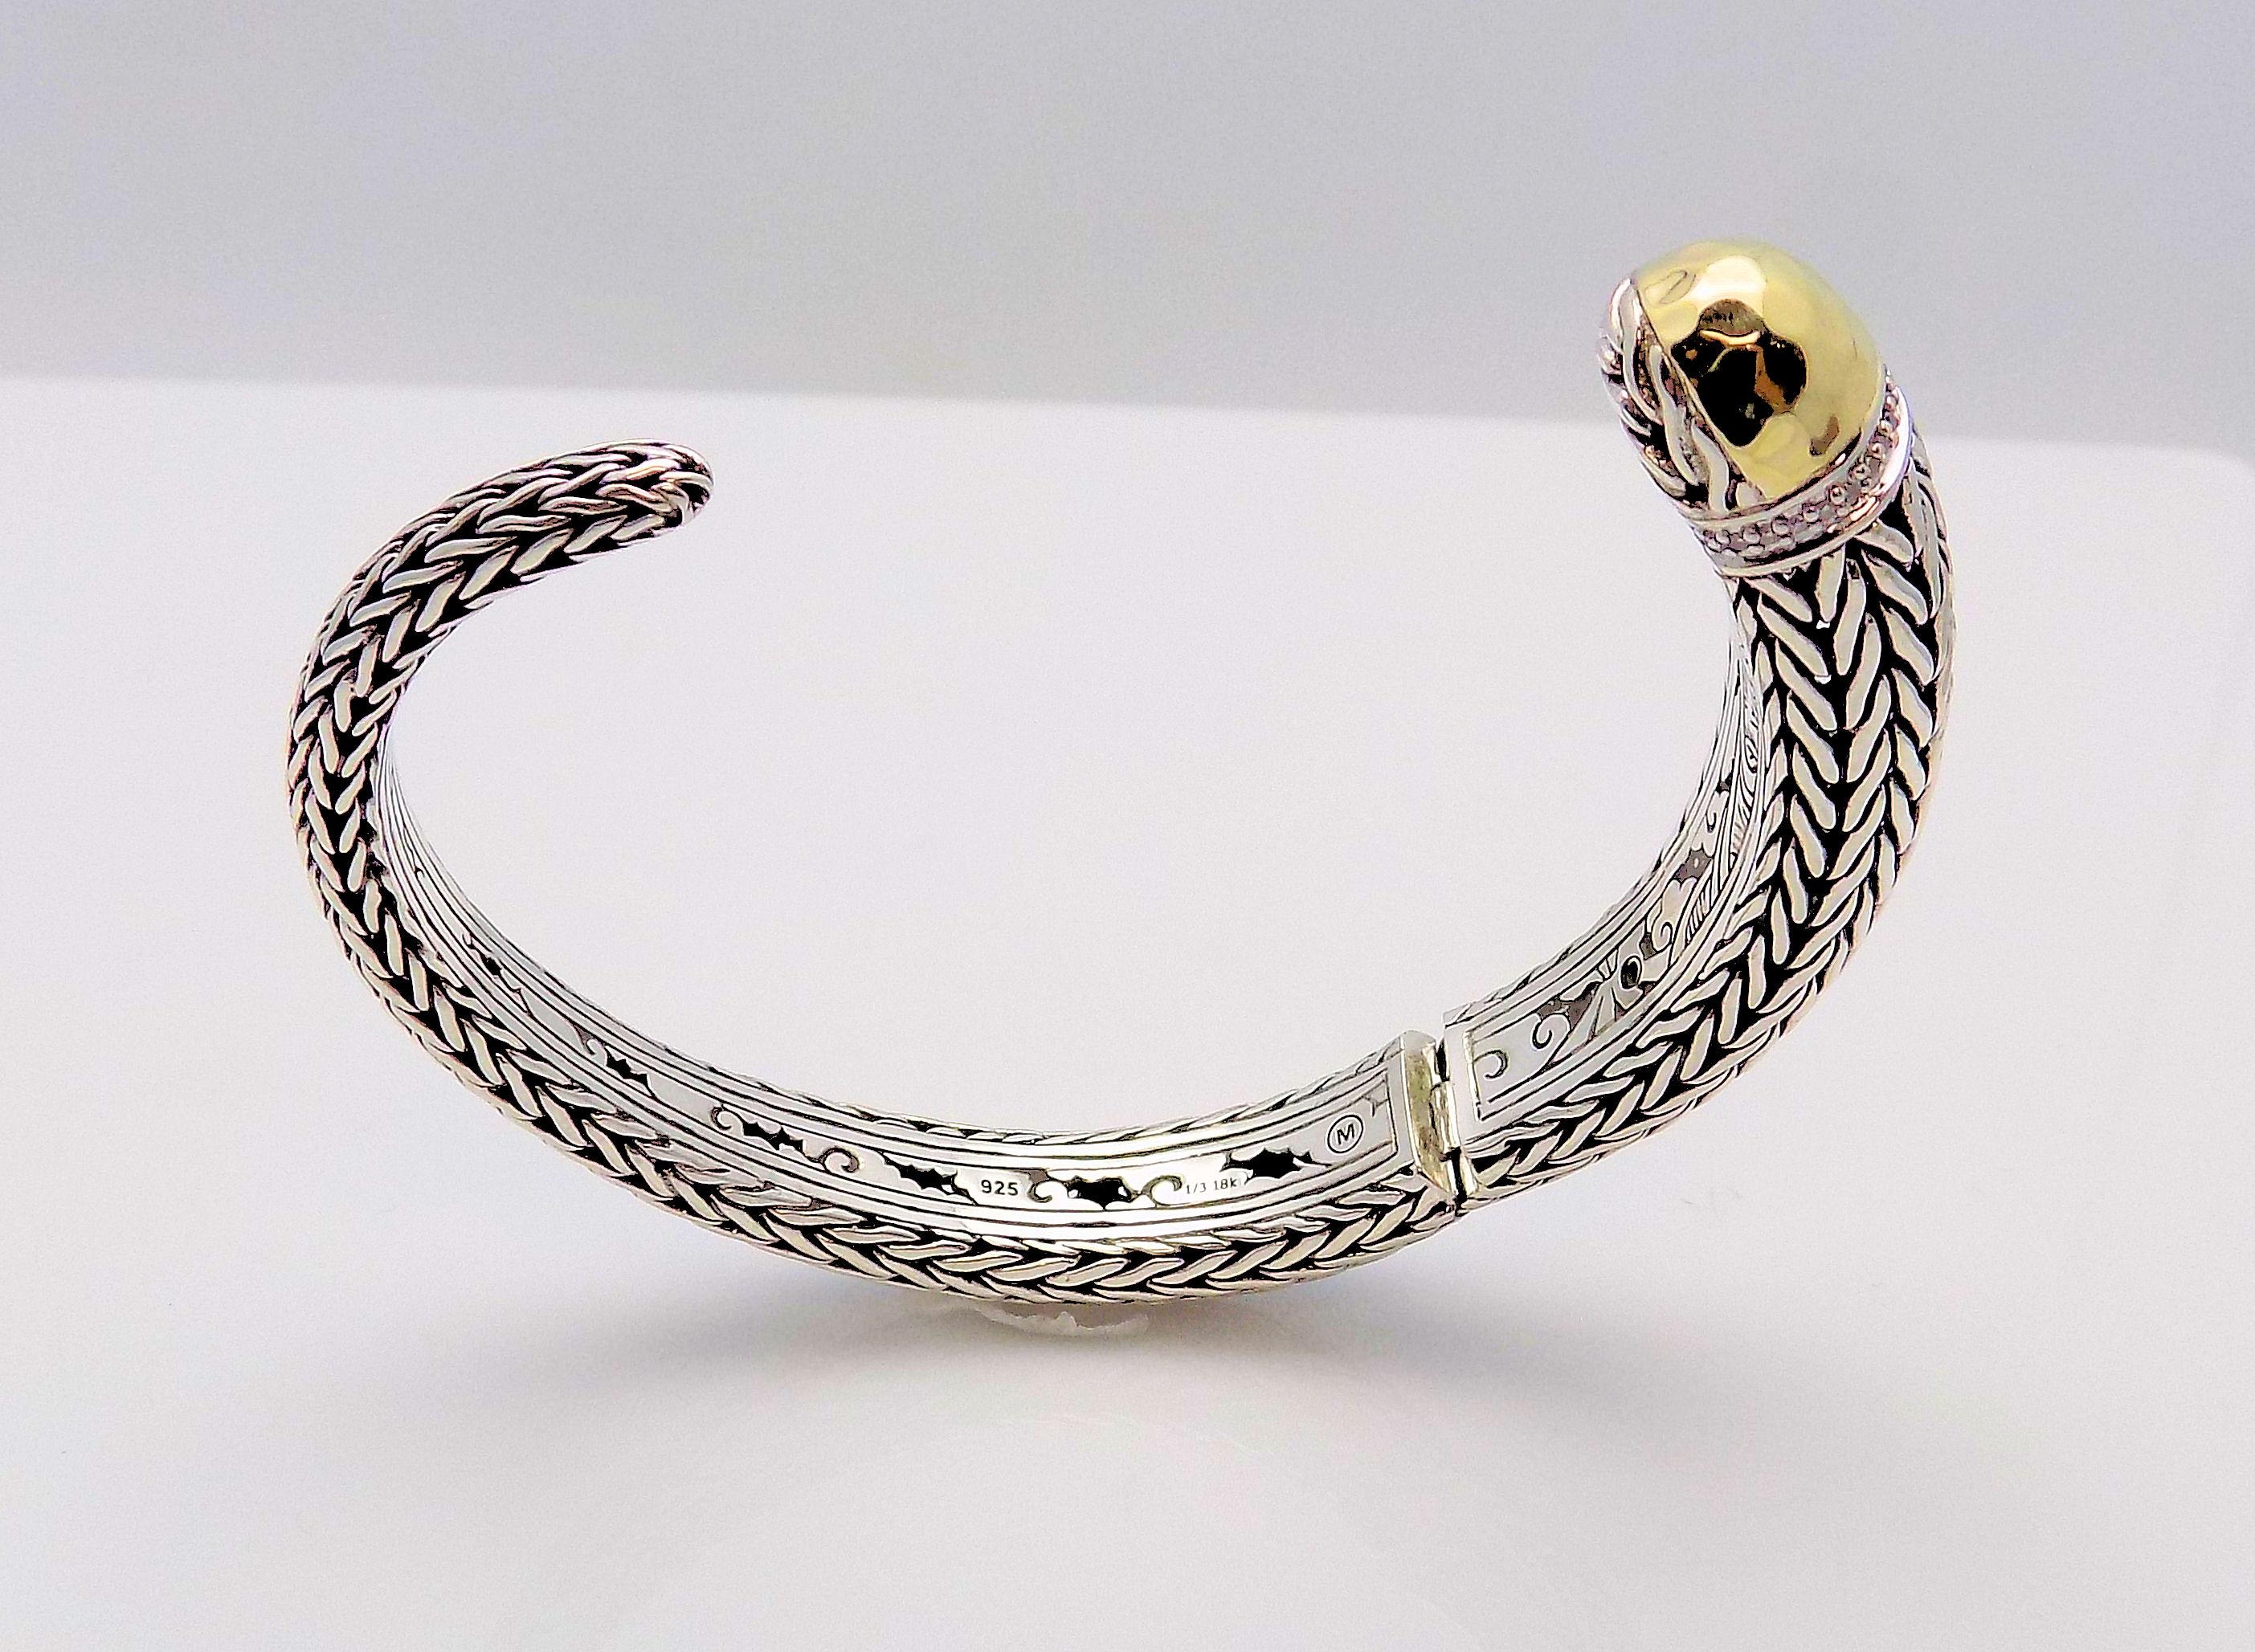 Presenting a Limited Edition, Artisan Handcrafted Sterling Silver and 18 Karat Yellow Gold Kick Cuff Bracelet with Diamond Banded and Hammered, Gold End Cap featuring 18 Round Brilliant Diamonds 0.09 Carat Total Weight, SI, H. This is the Classic